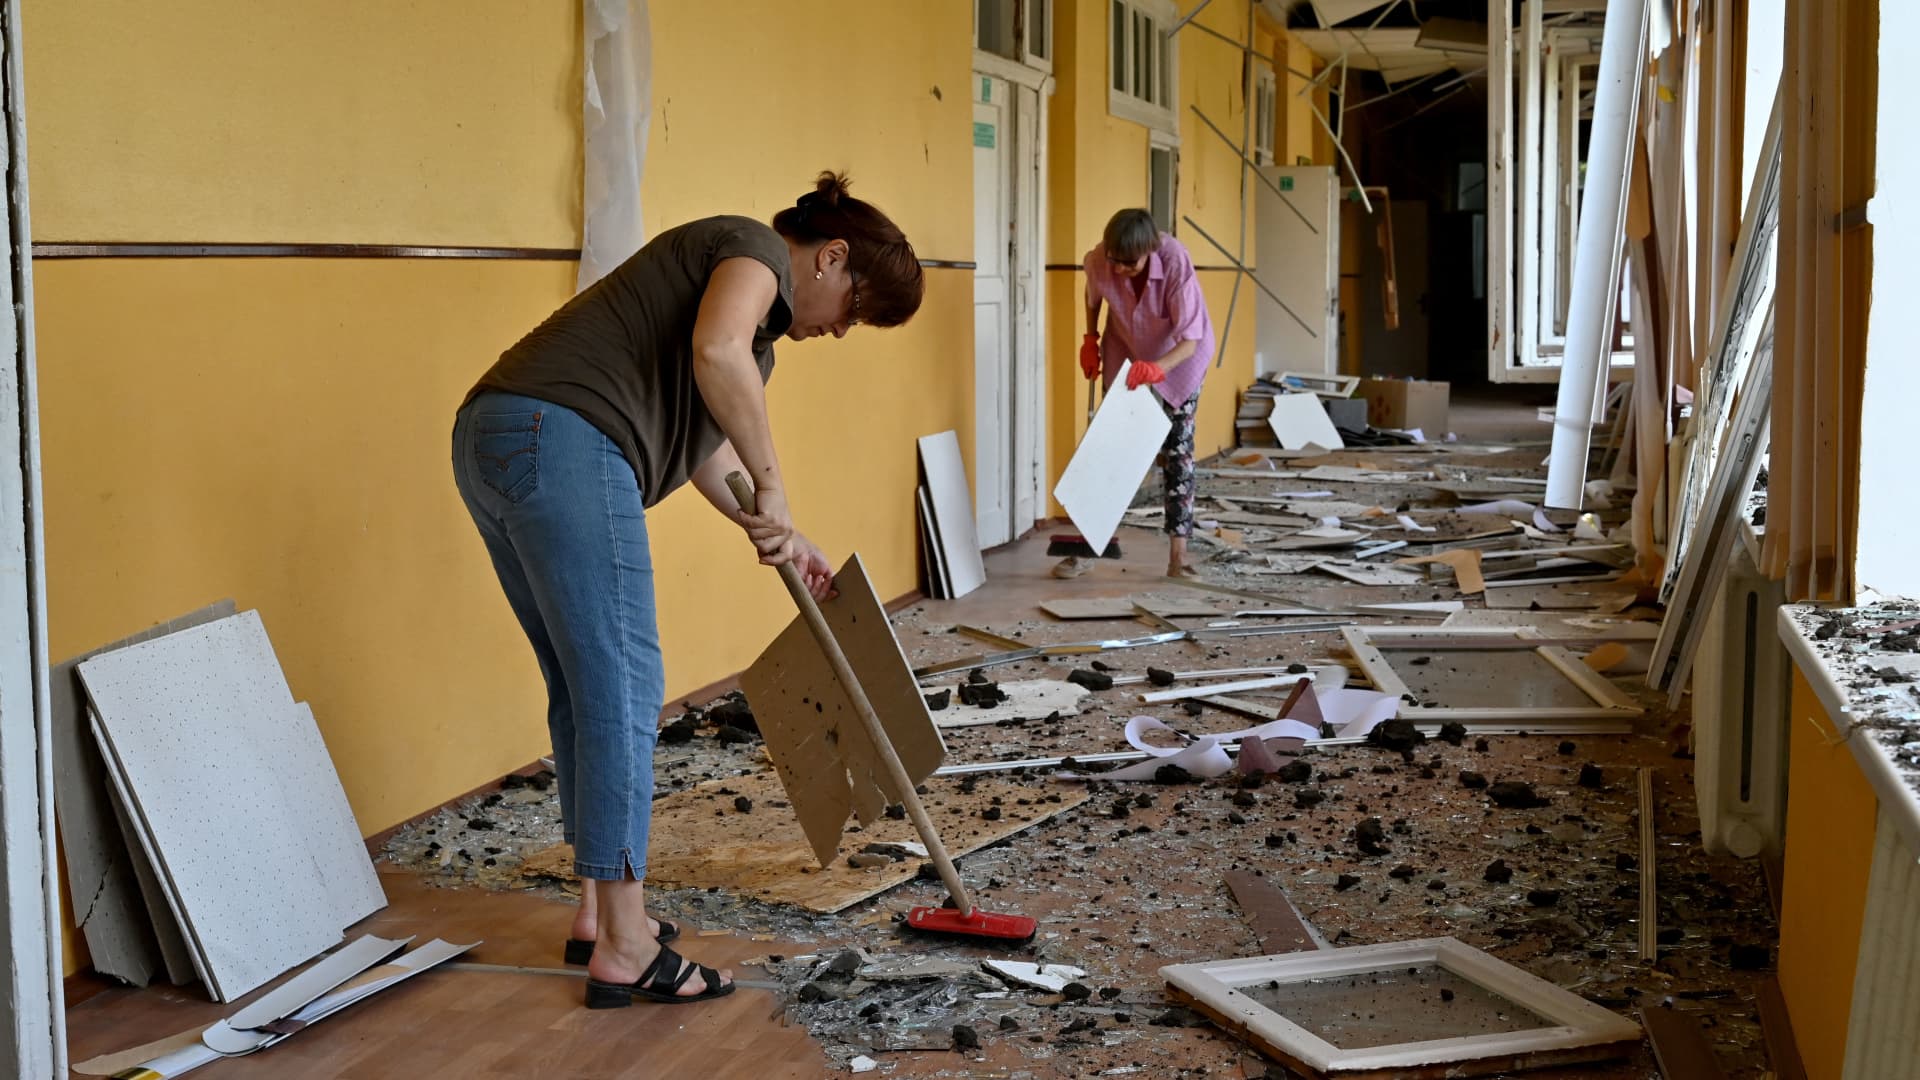 Teachers and employees clear debris in a corridor of a special comprehensive boarding school for visually impaired children which has suffered damages after a strike on its premises, in Kharkiv, on July 7, 2022, amid Russia's military invasion launched on Ukraine.